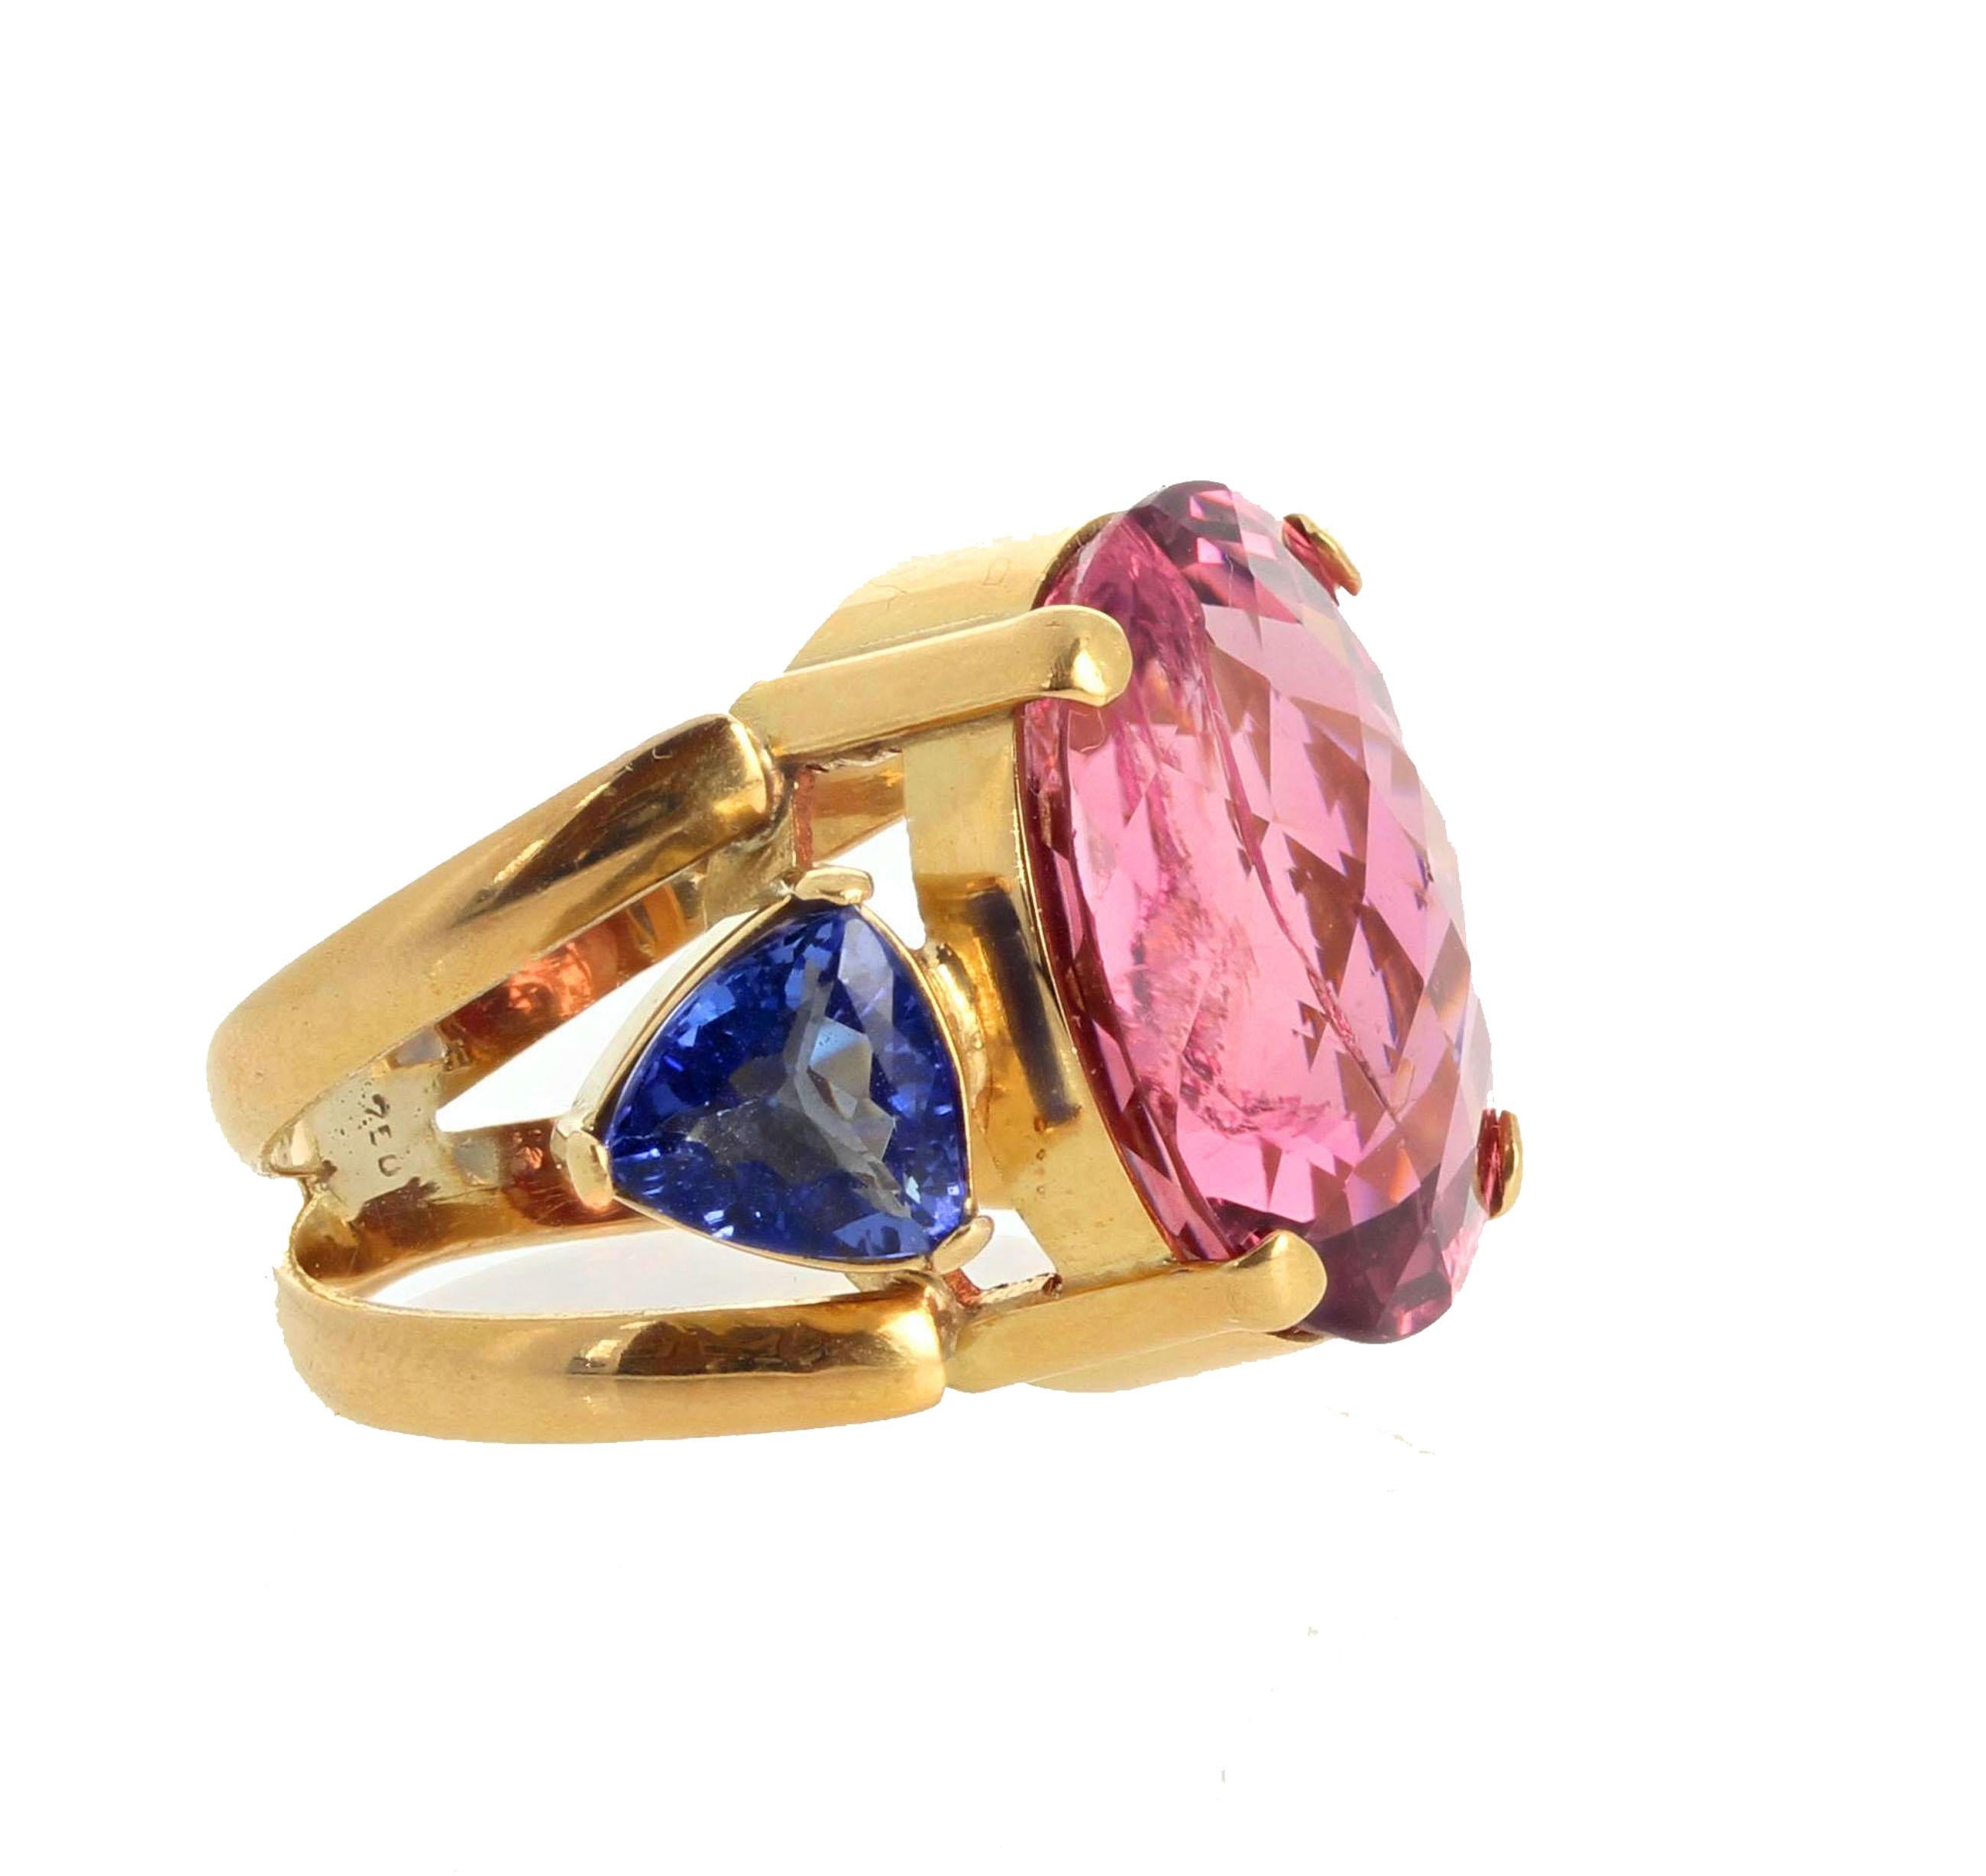 AJD Hollywood 16 Ct Glittering Pink Tourmaline & Tanzanite 18Kt Gold Ring In New Condition For Sale In Raleigh, NC